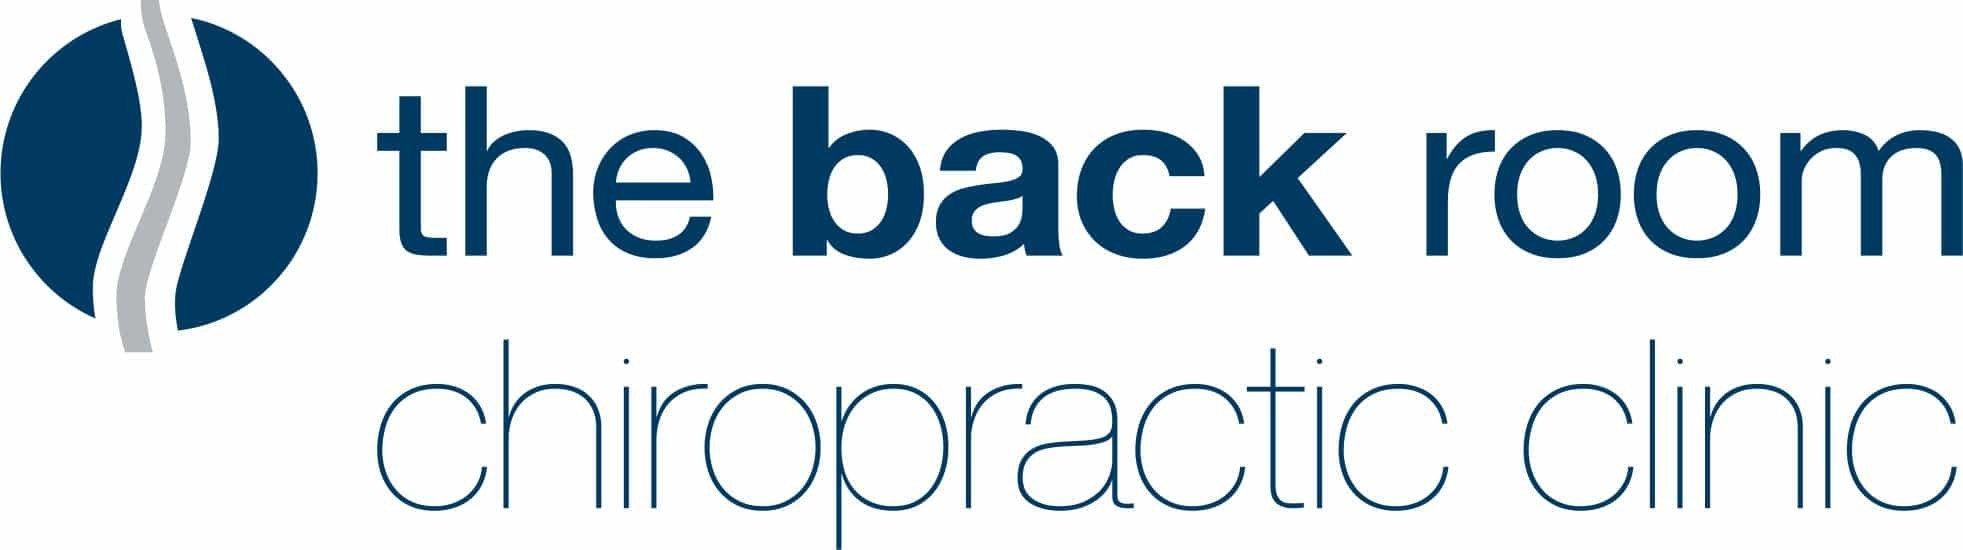 Logo of The Back Room Chiropractic Clinic